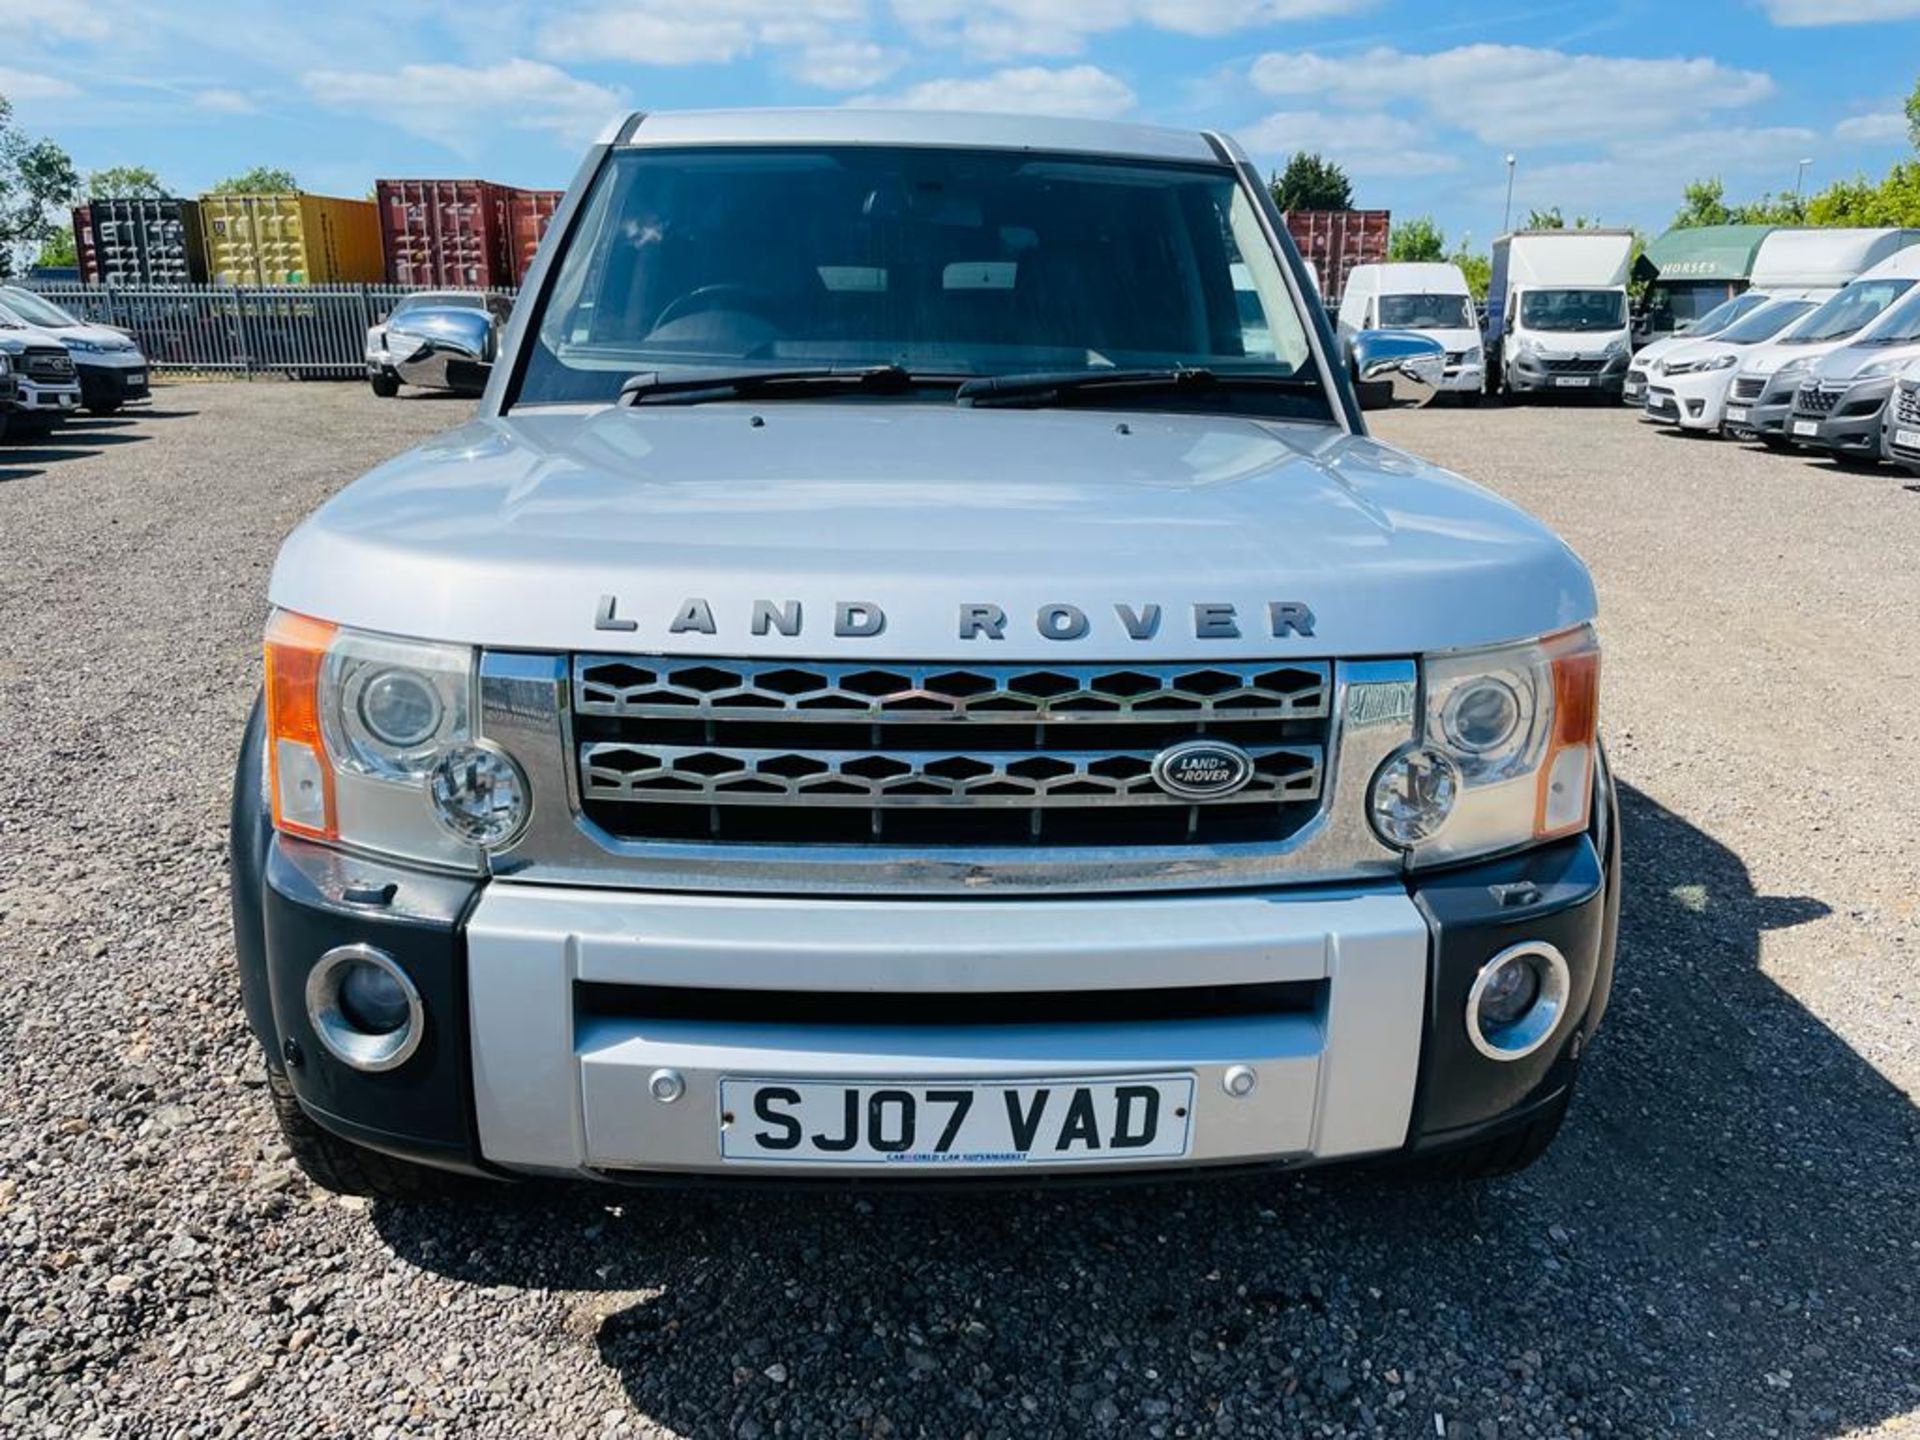 ** ON SALE ** Land Rover Discovery 3 TDV6 HSE Auto 190 2007 '07 Reg' 7 seater - Sat Nav - A/C - Image 2 of 30